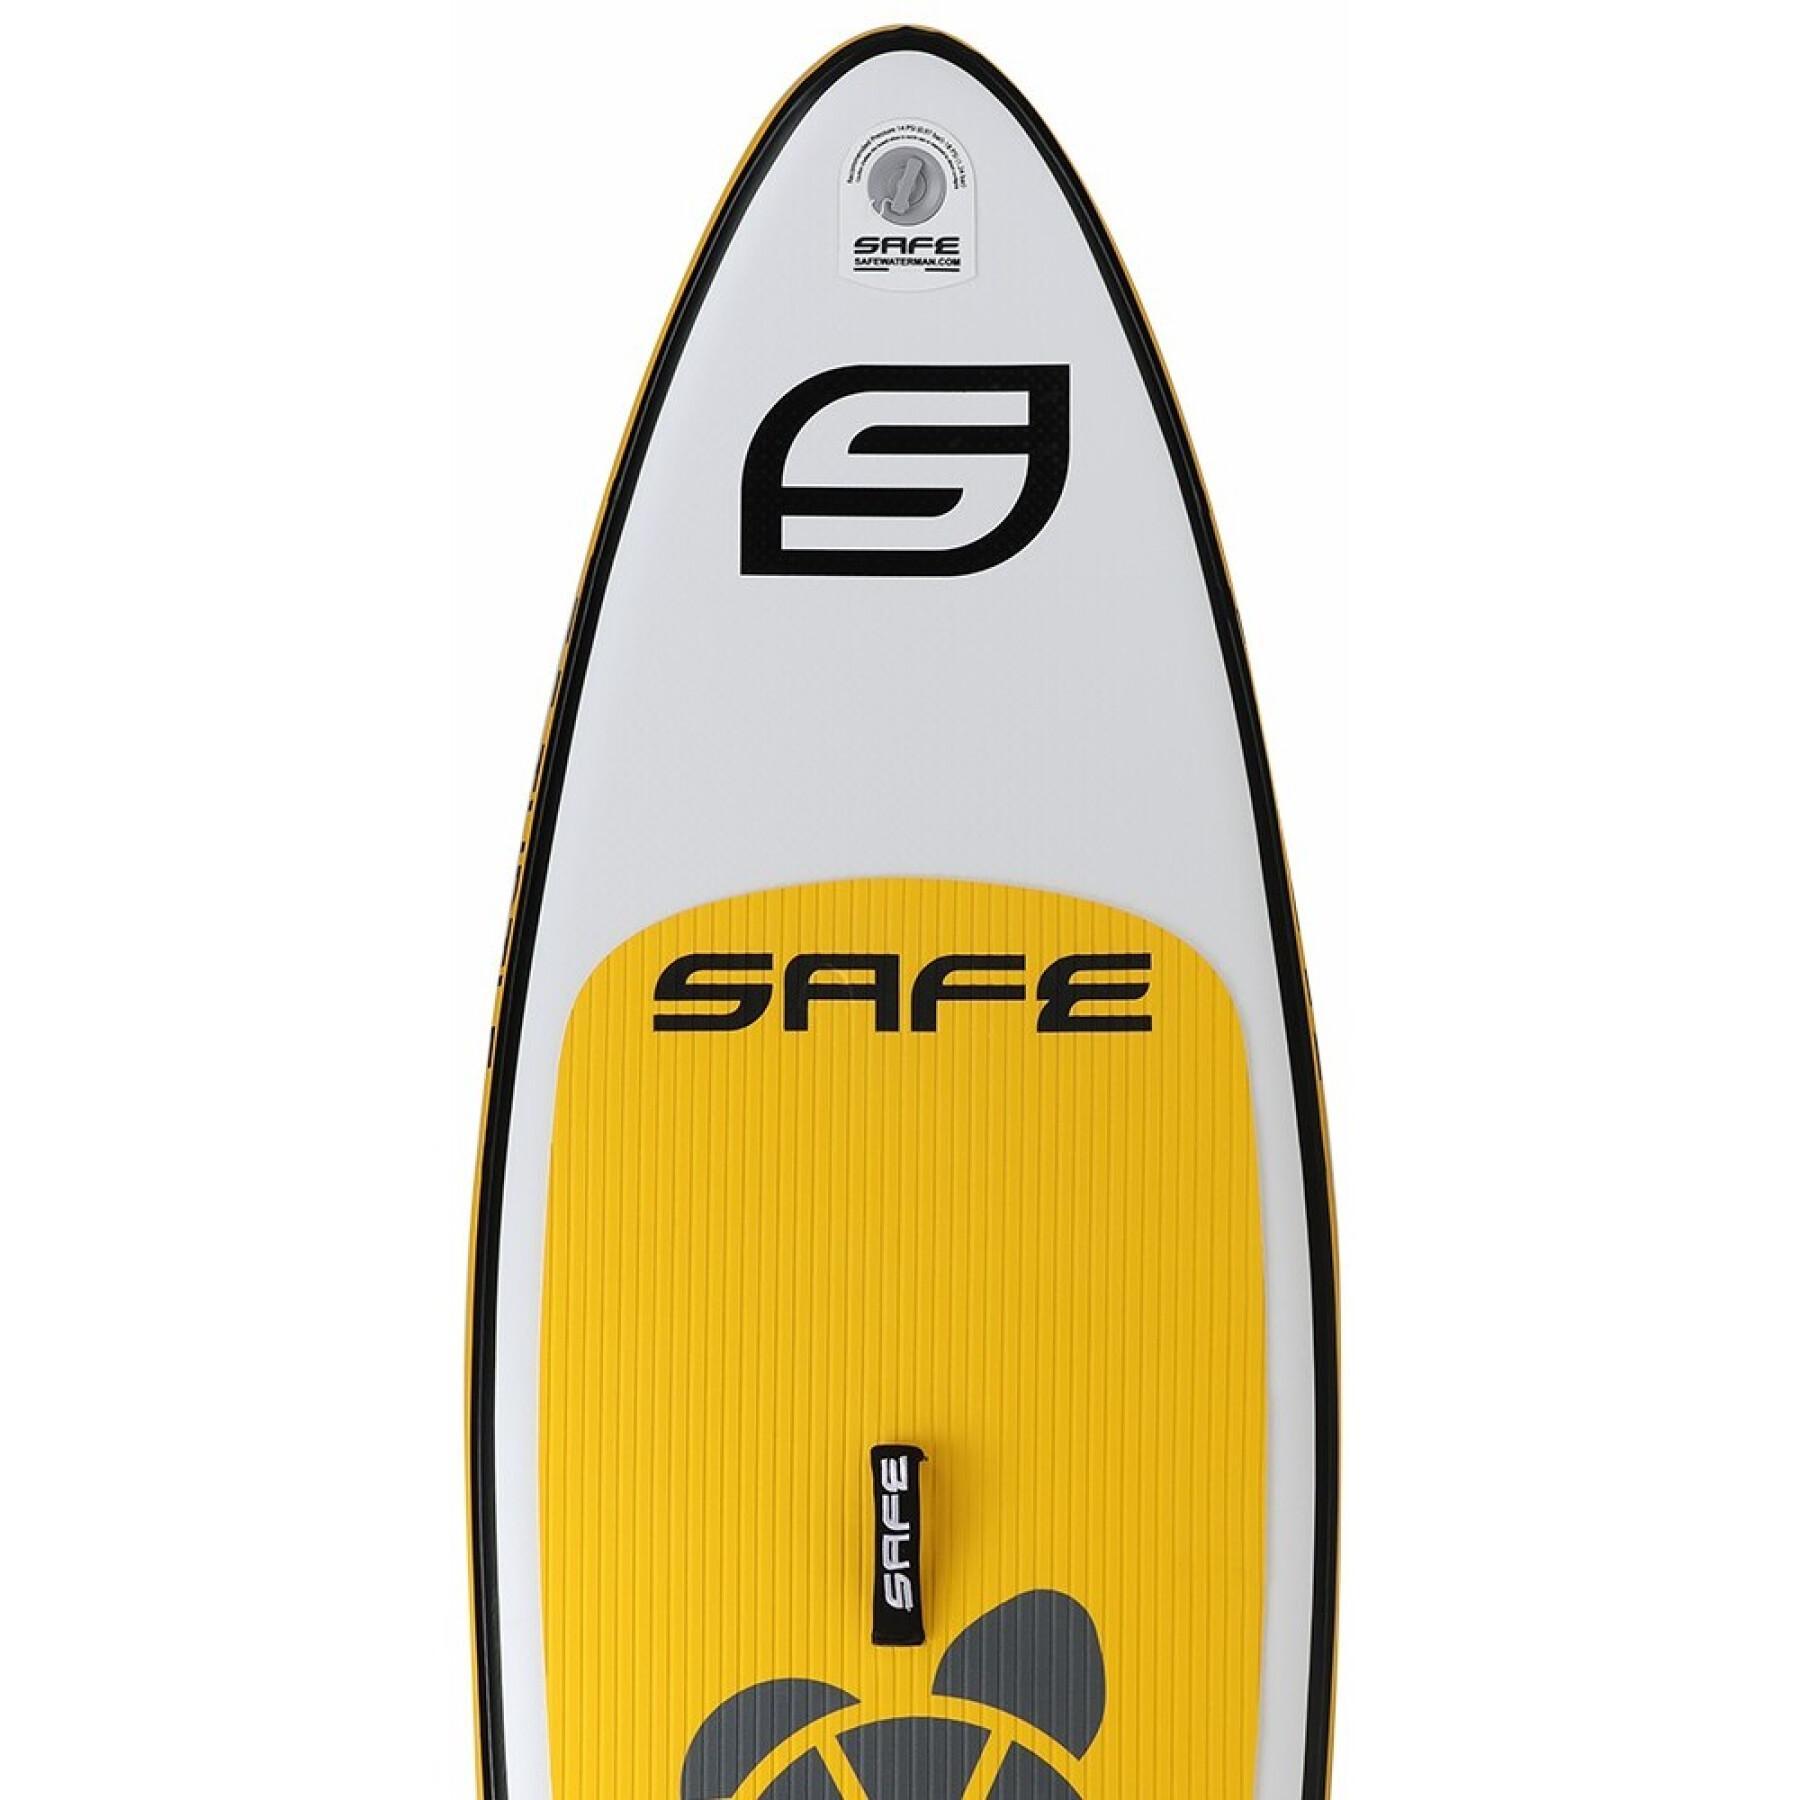 Stand up gonfiabile per bambini Safe Waterman Turtle – 7’5